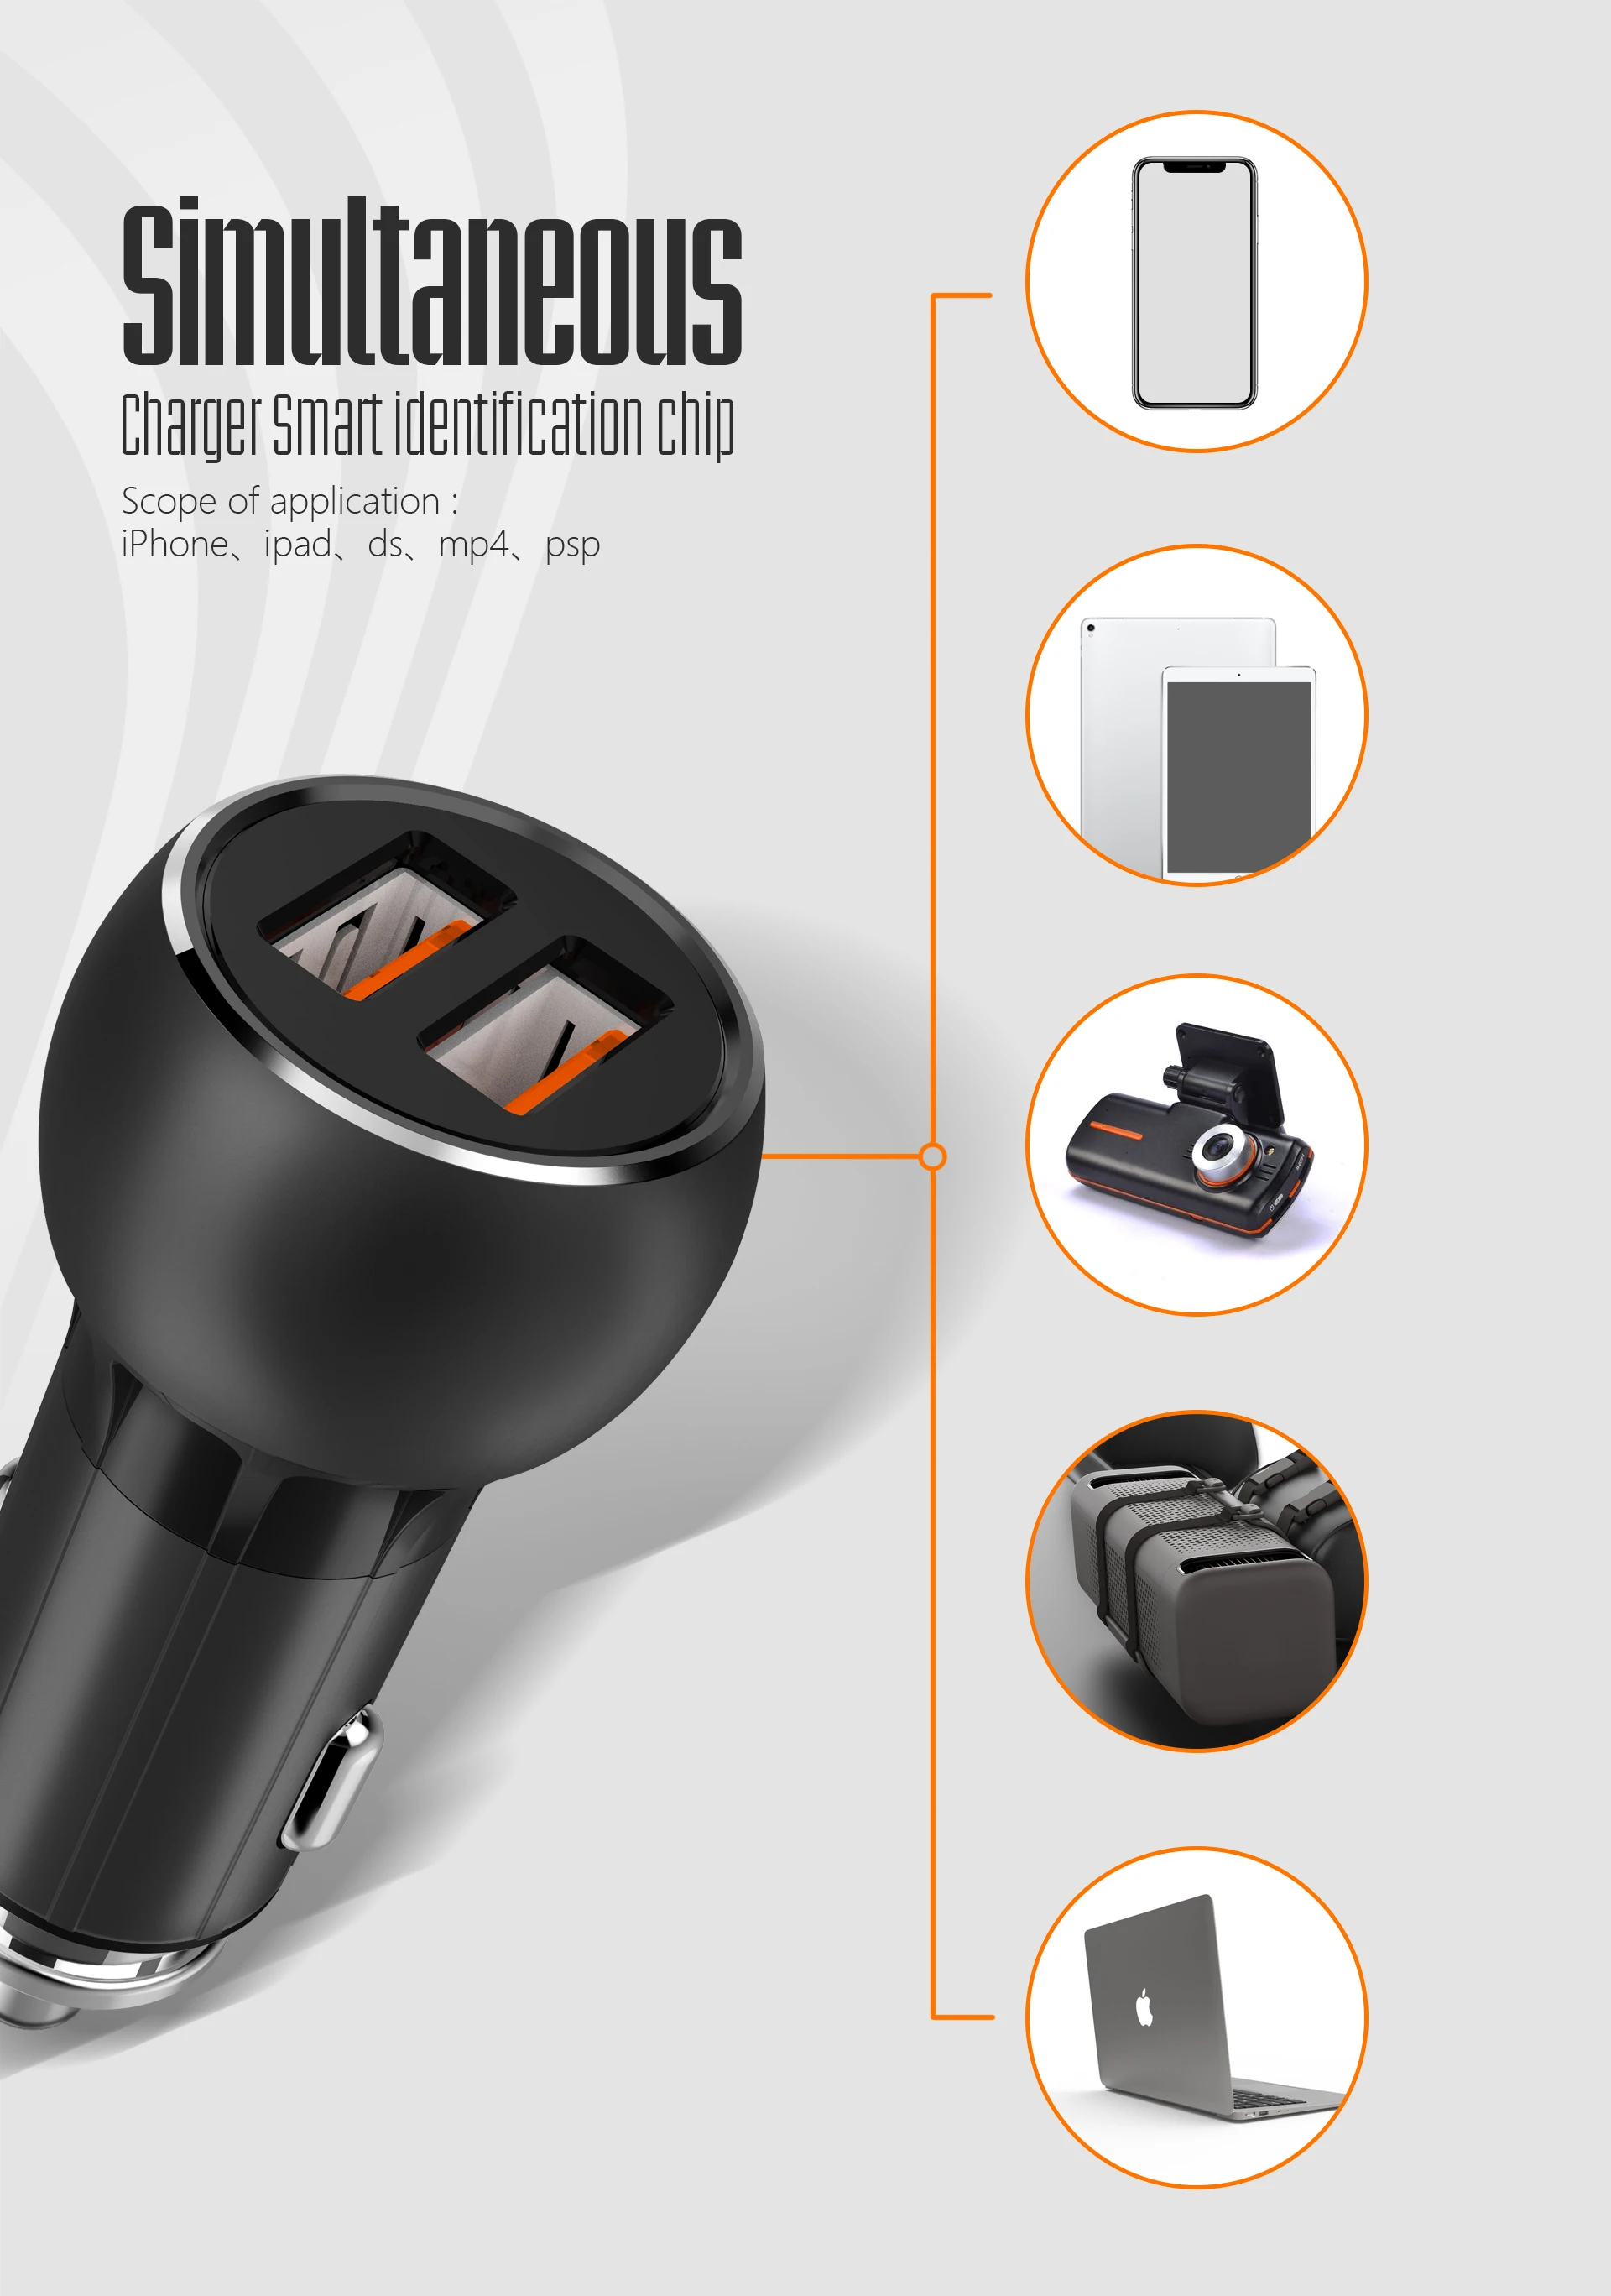 LDNIO C503Q Dual Port QC3.0 Car Charger 2 USB Fast Charging In Car Charger